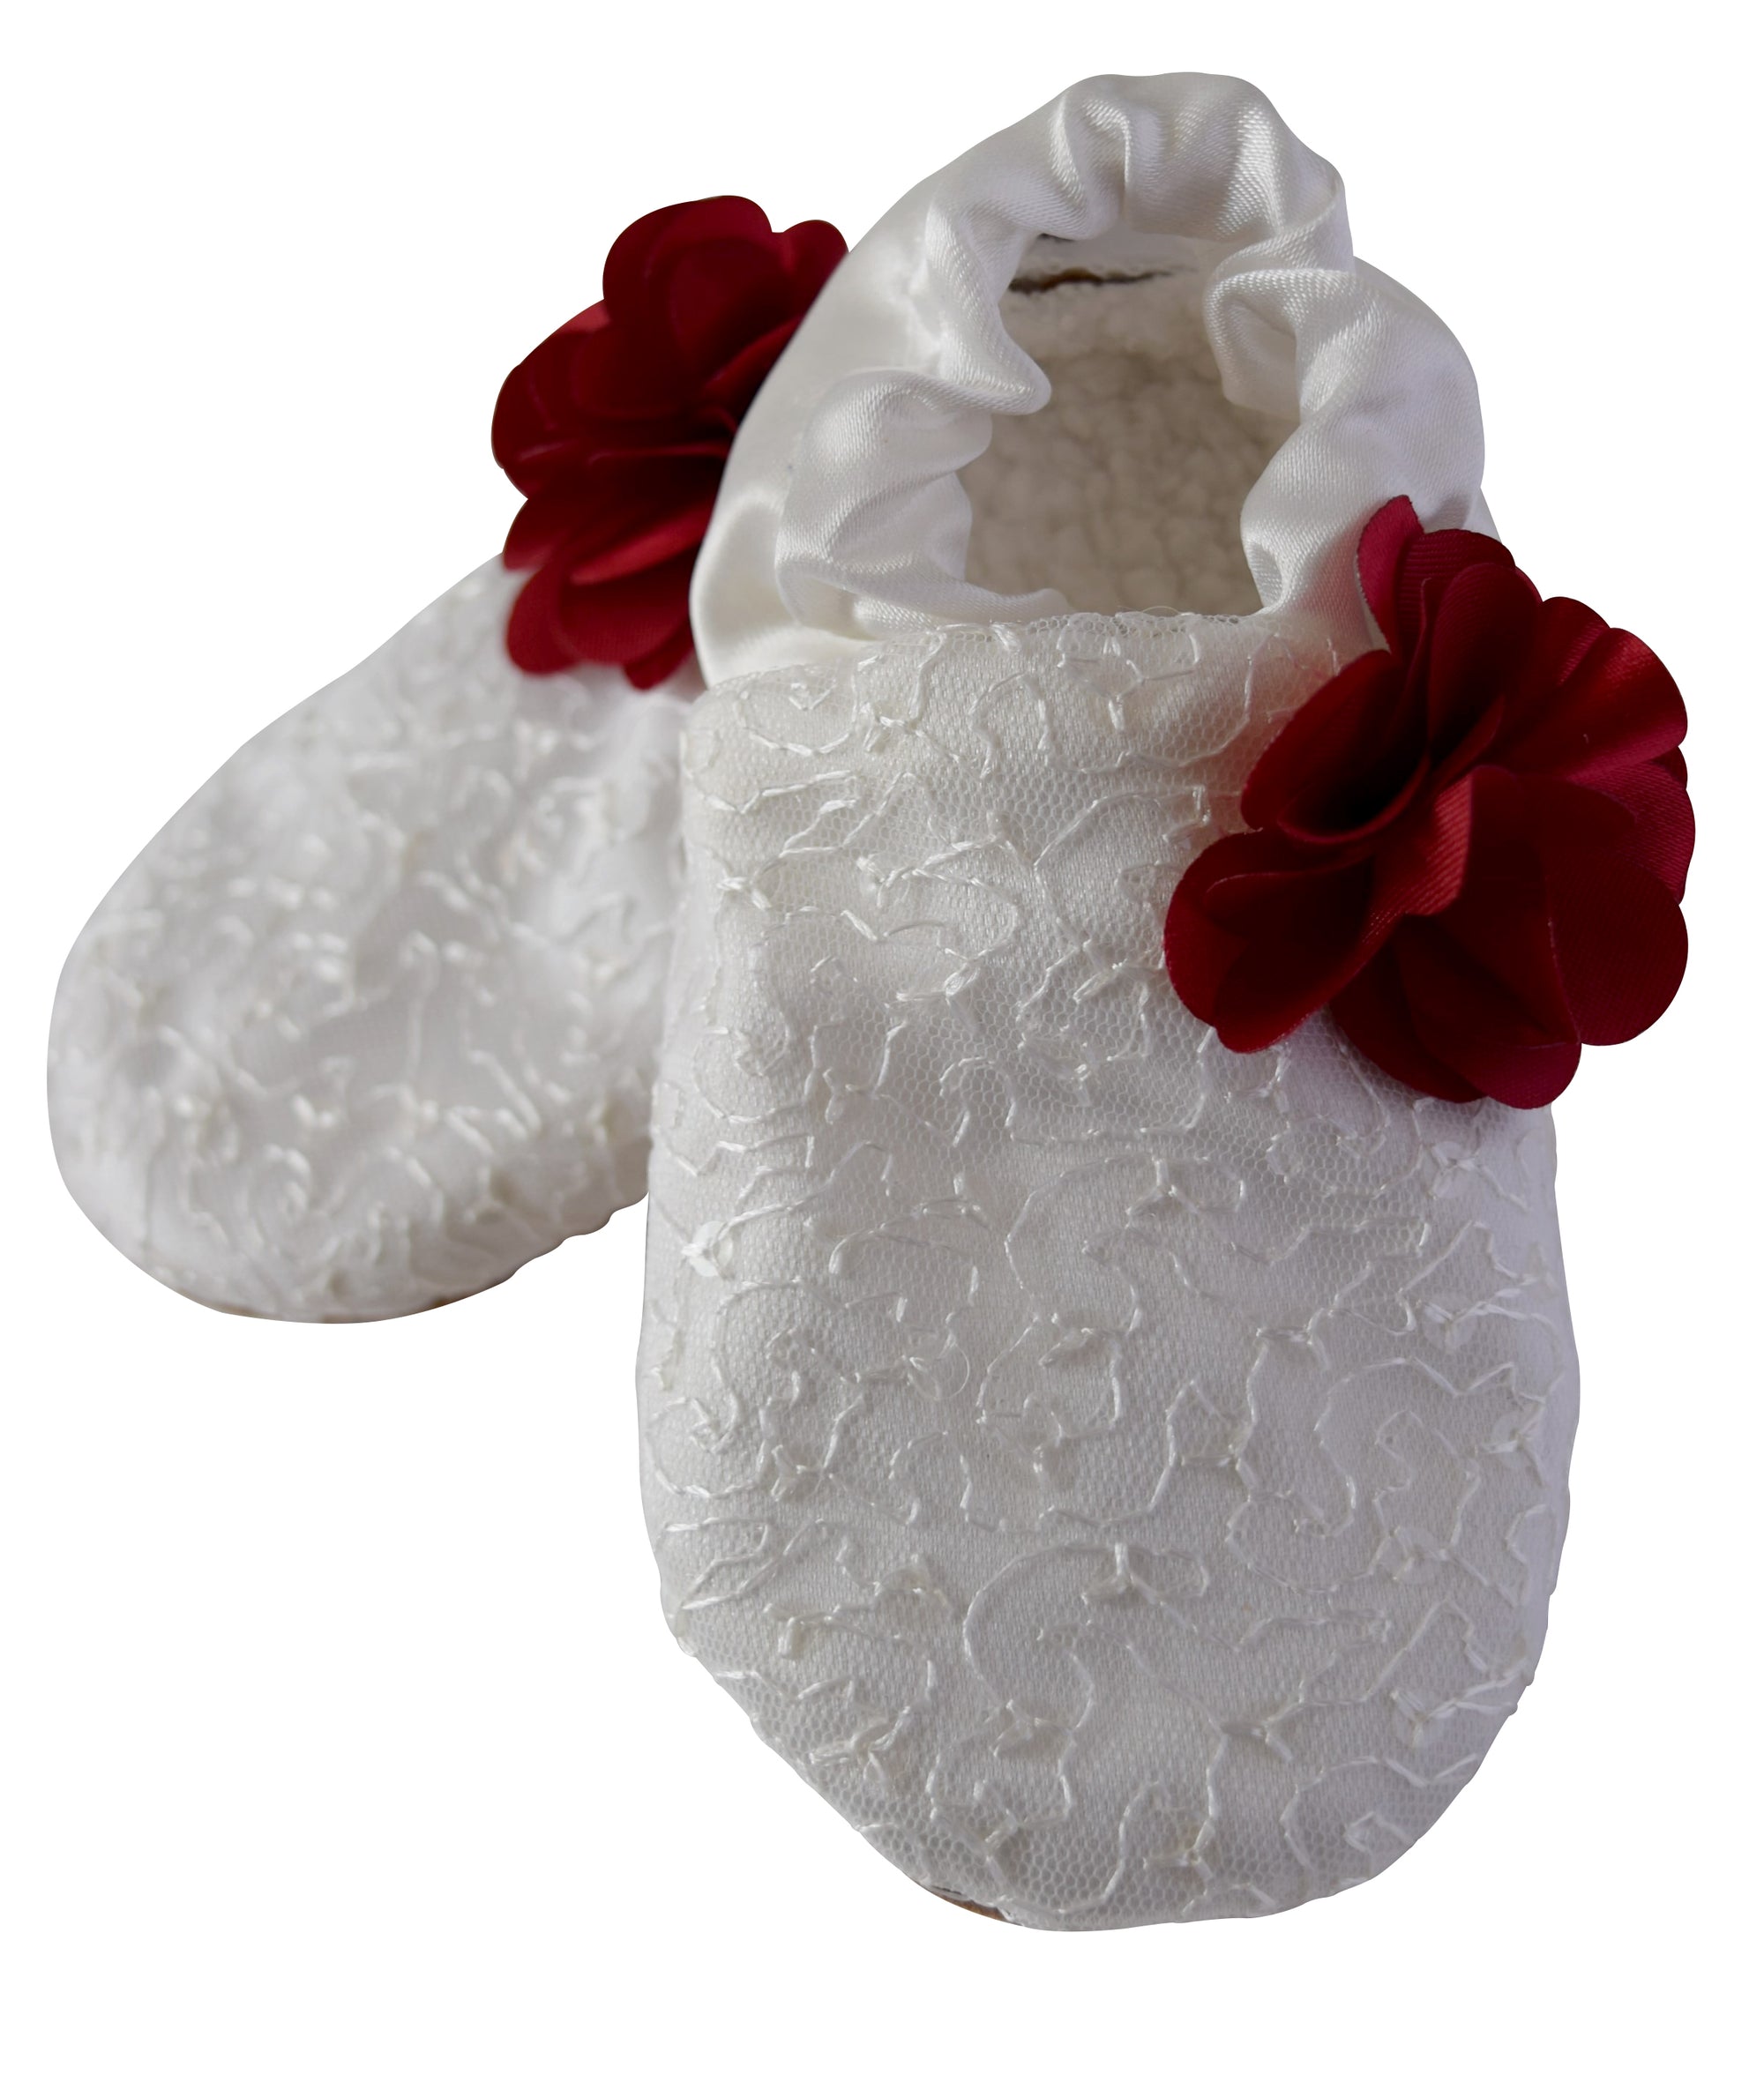 Kids Shoes_Ivory Mono Lace with Maroon Flower Booties